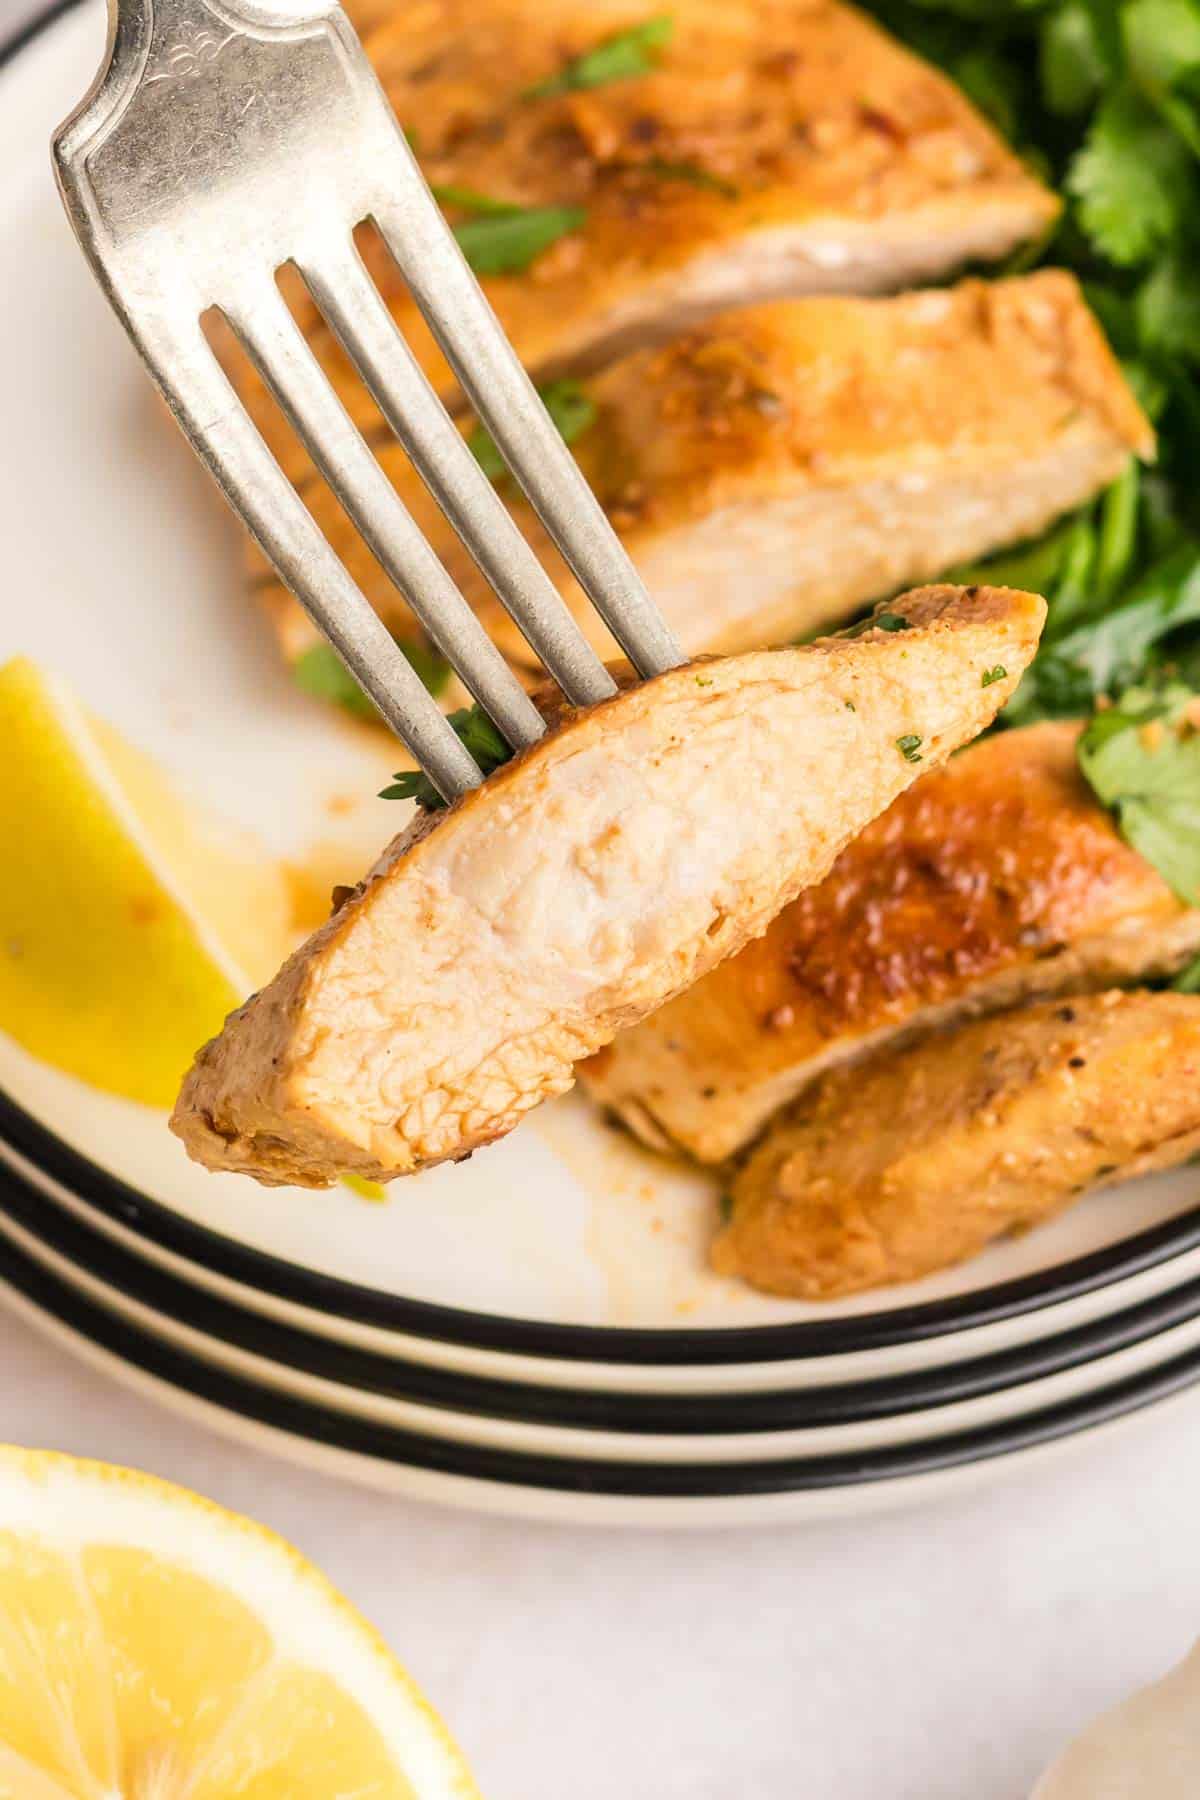 A fork picking up a slice of greek chicken showing the juicy inside of the bite.